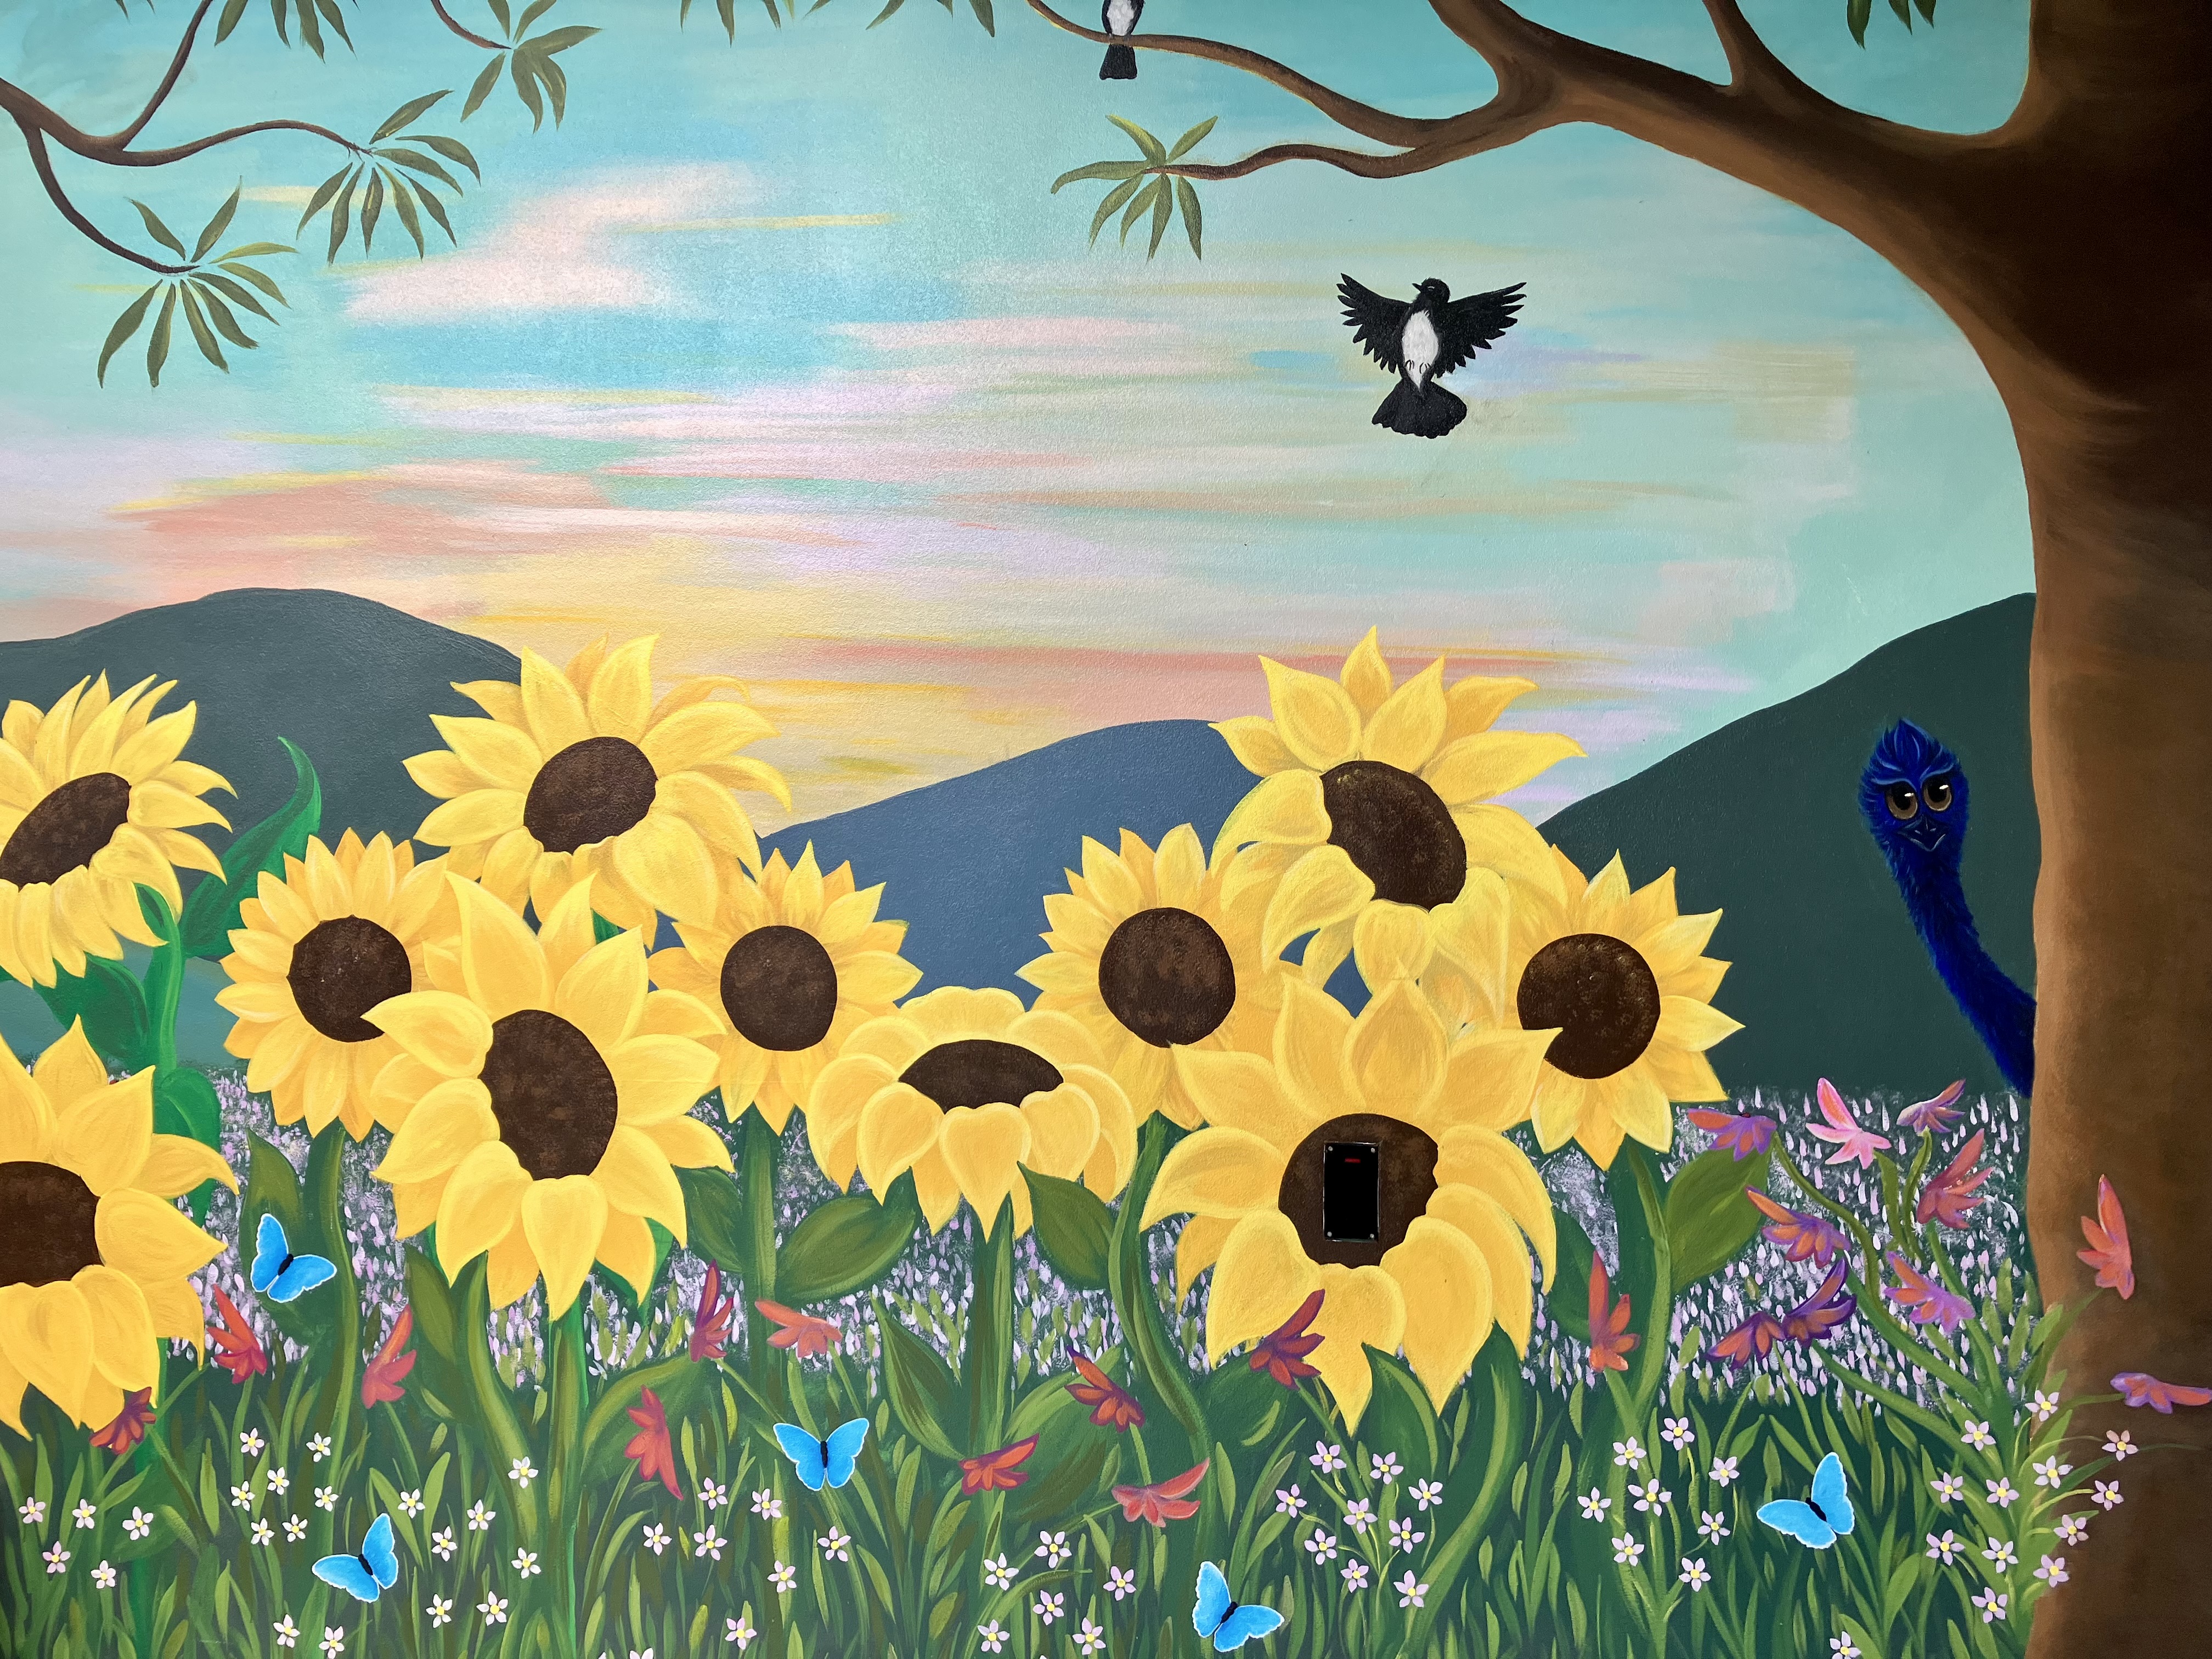 Nature-themed mural inside mental health pod featuring sunflowers